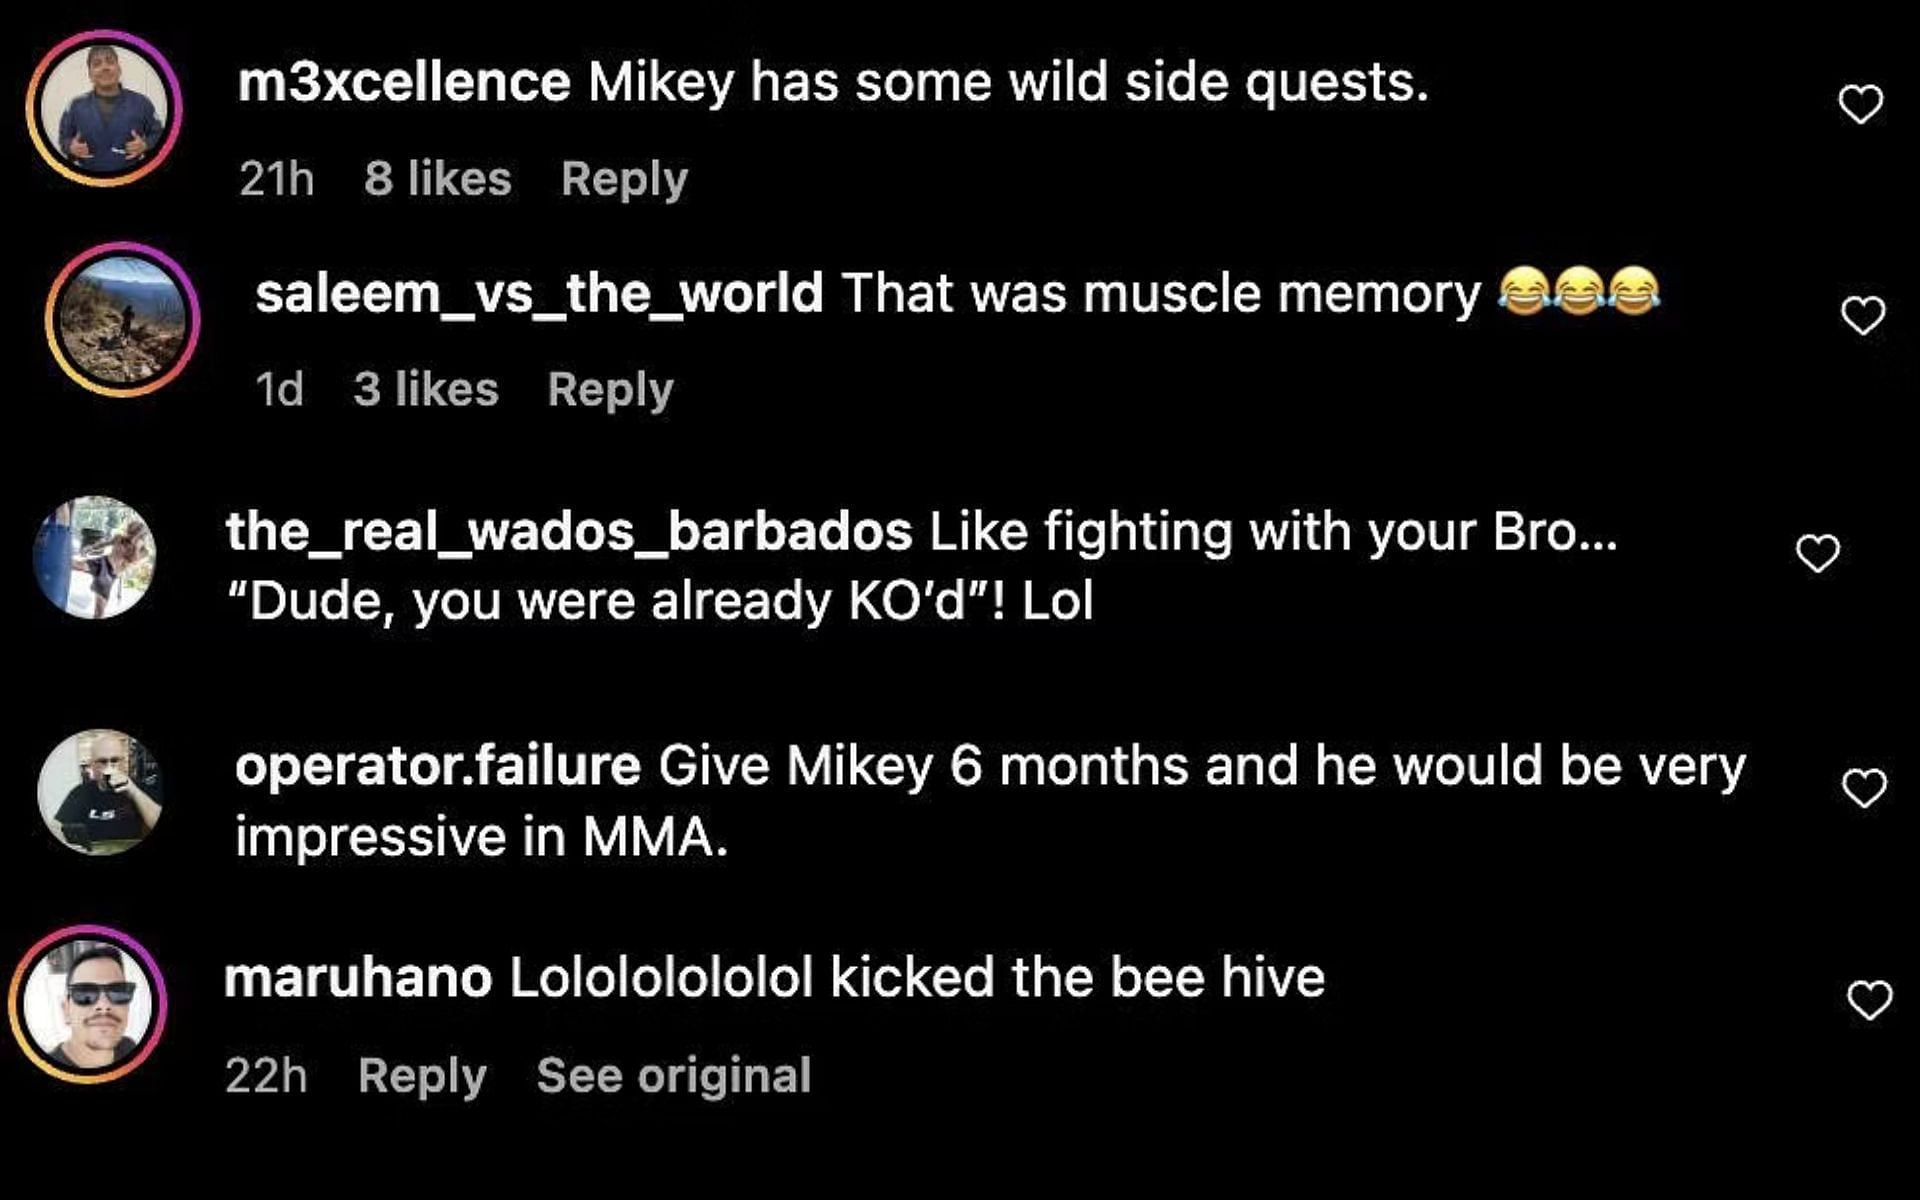 Comments on the video